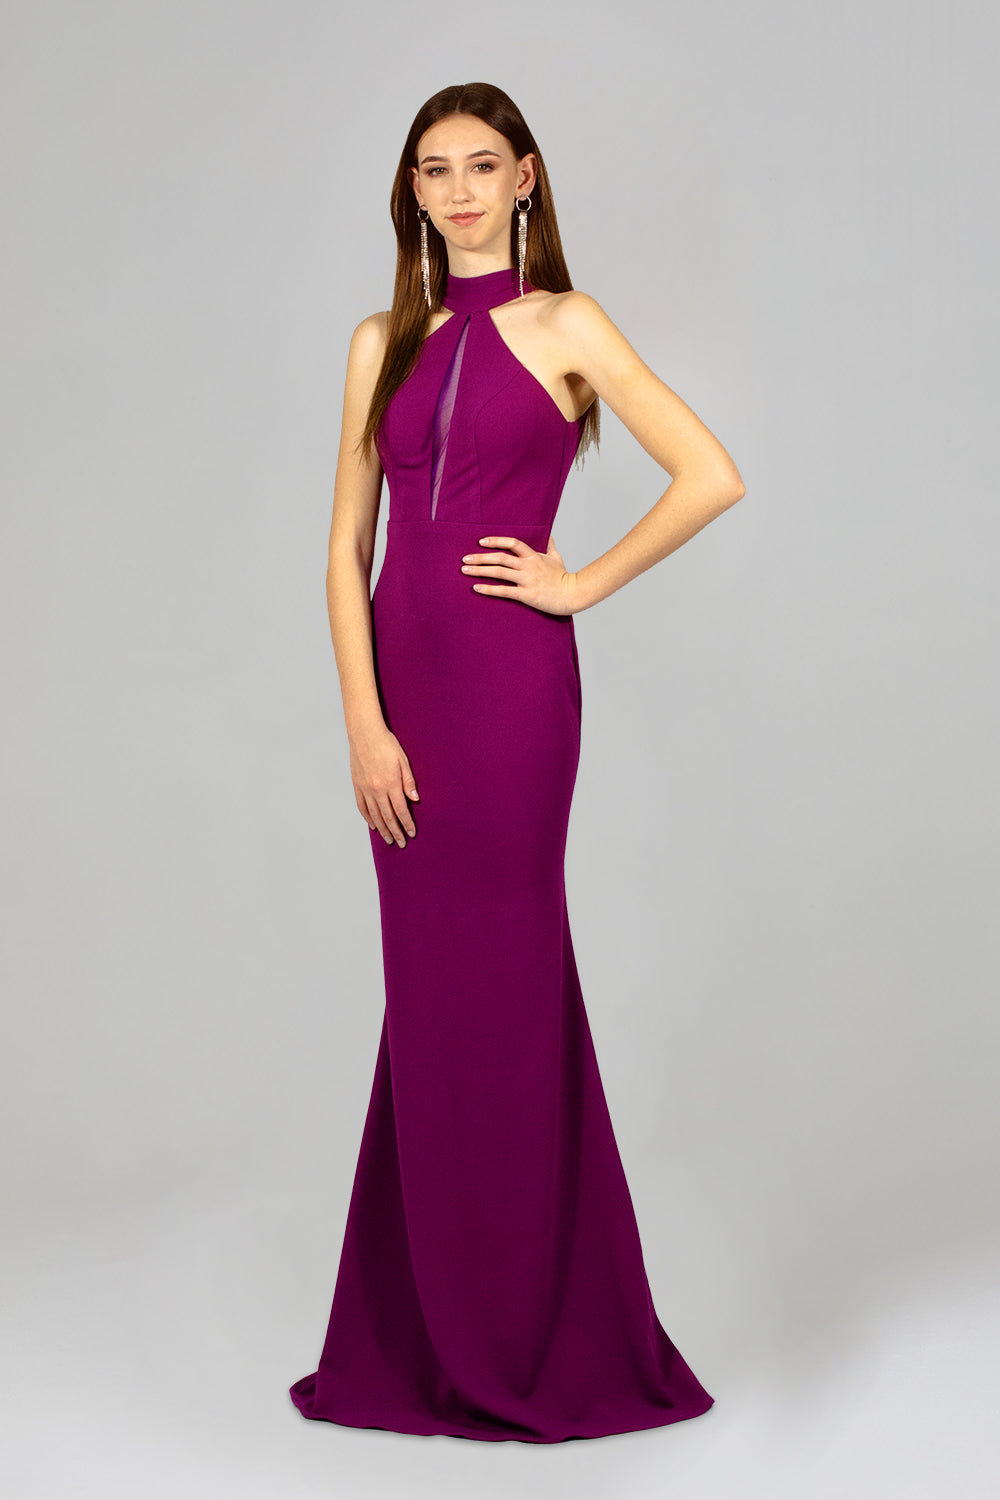 halter high neck fitted purple bridesmaid dresses custom made envious bridal & formal